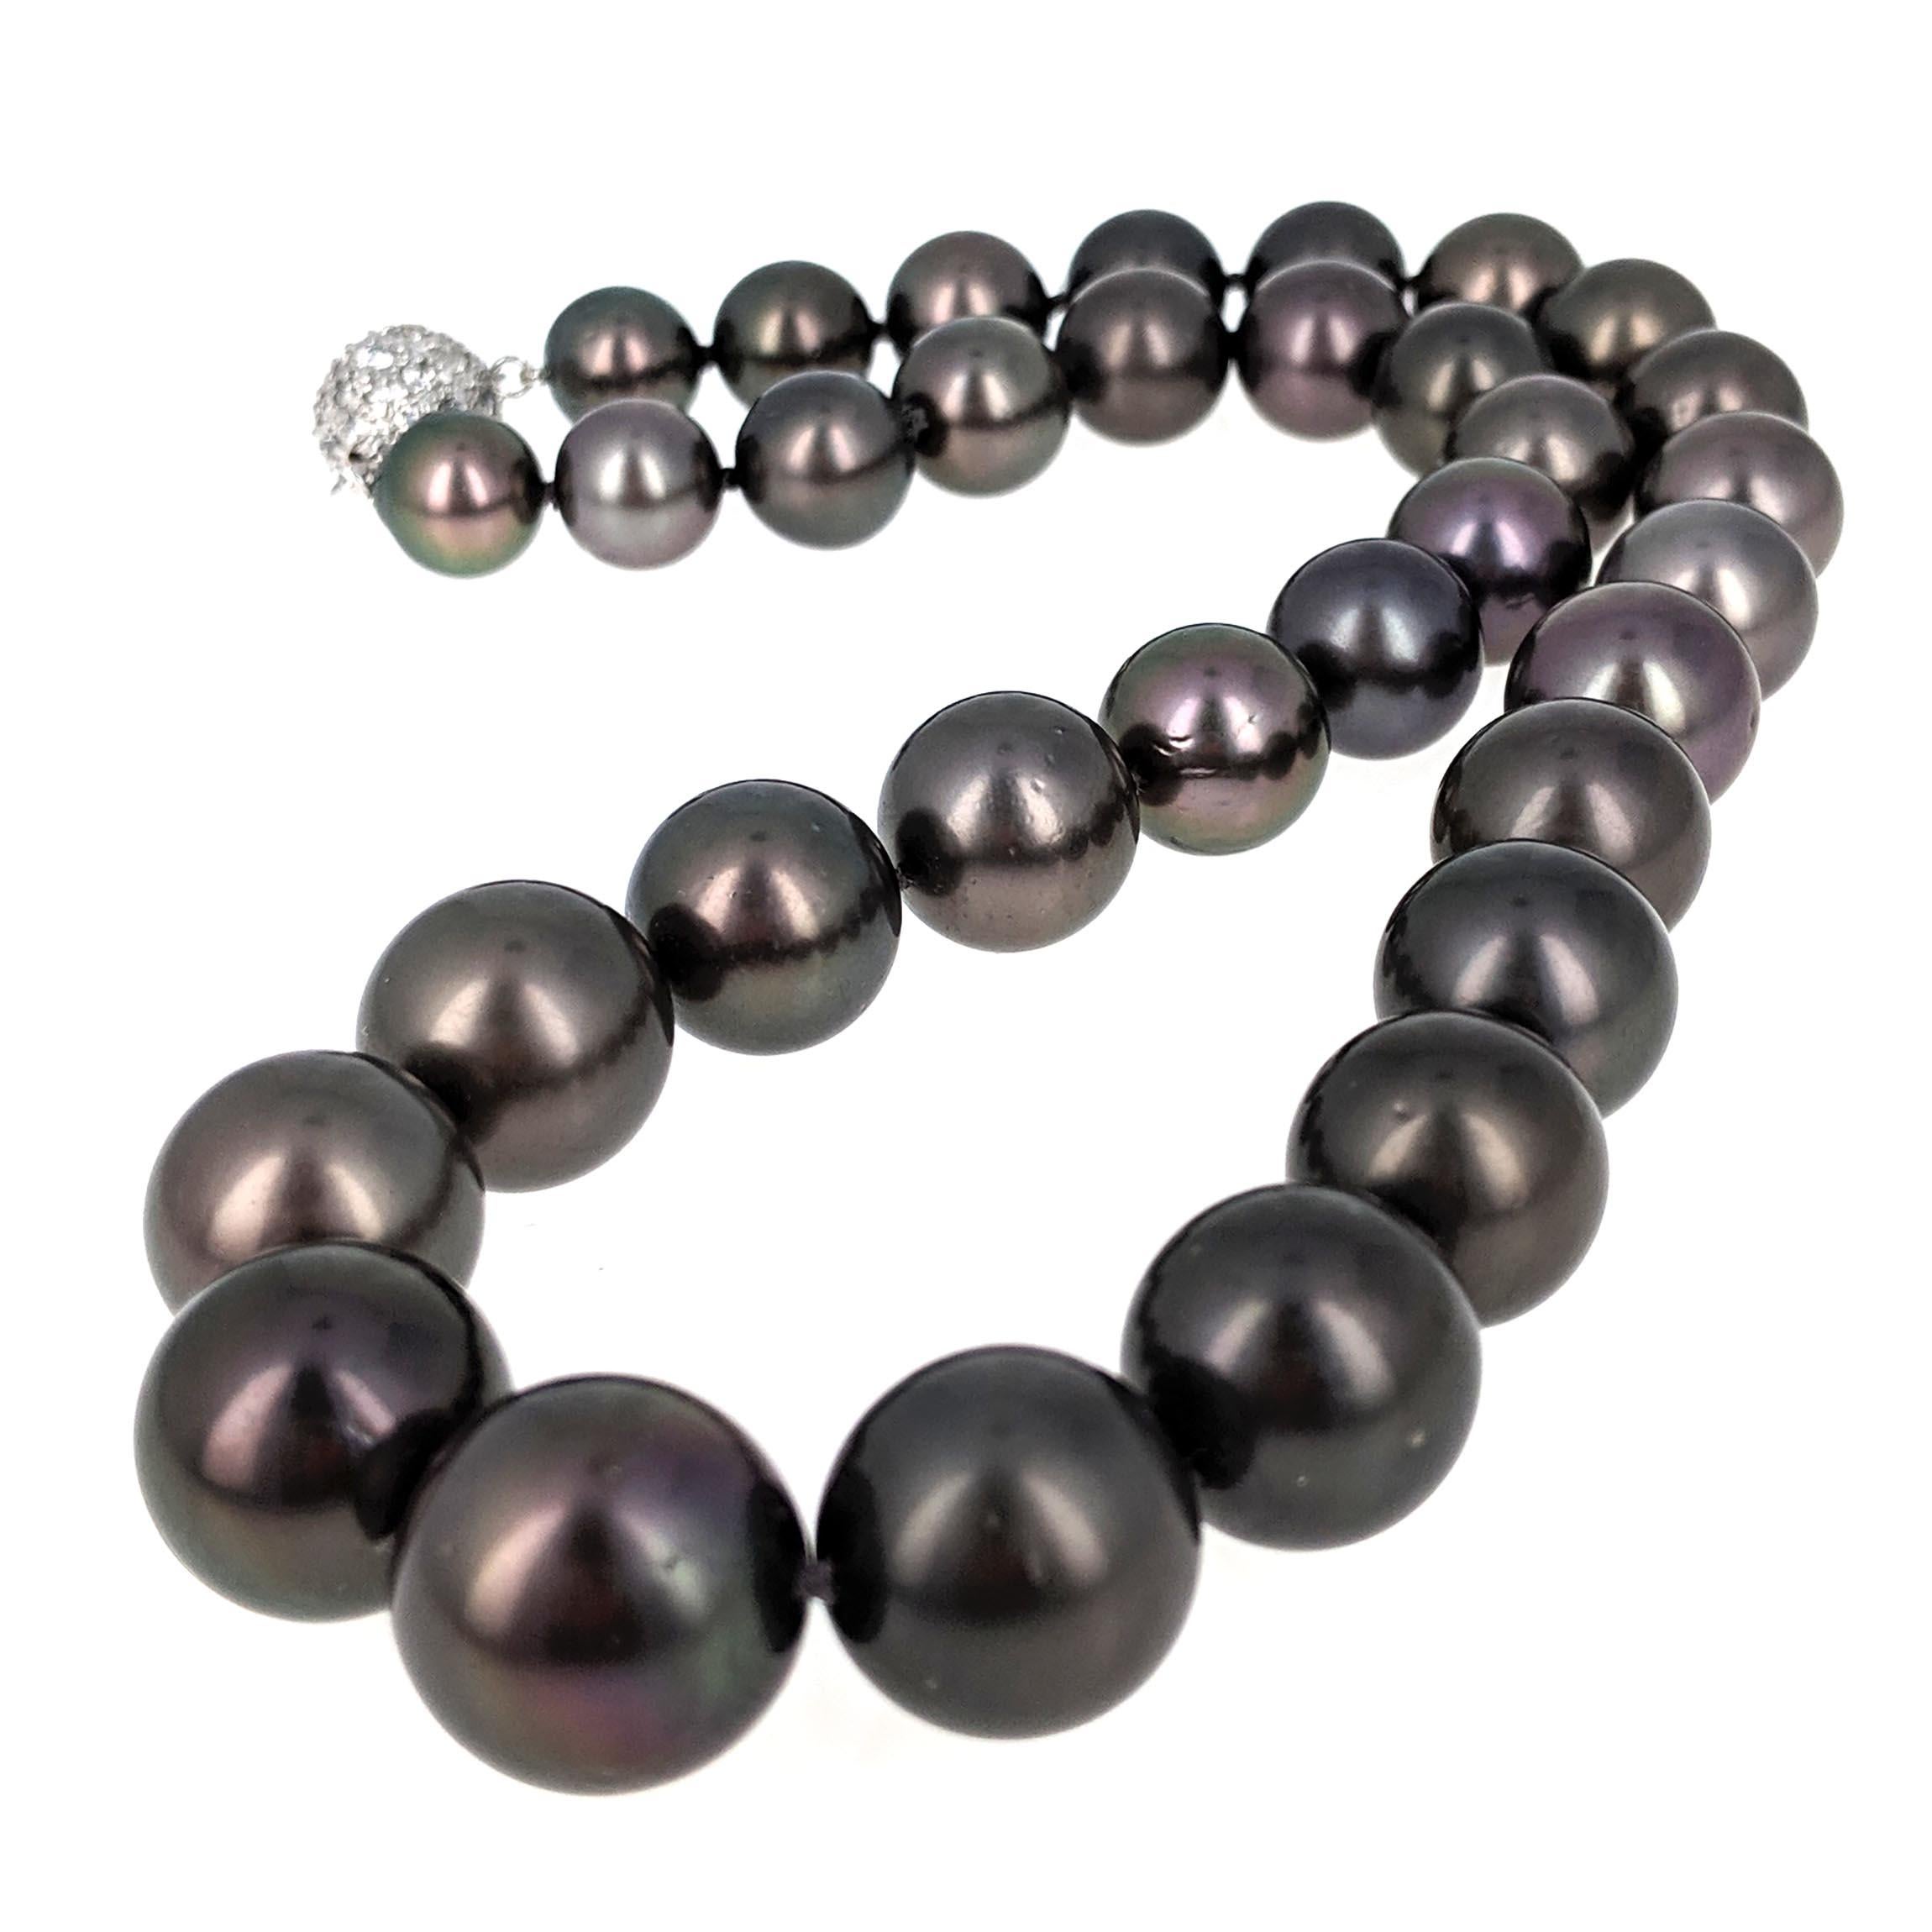 This striking pearl necklace is comprised of a single strand of 33 black Tahitian cultured pearls ranging in sizes from 10.60 mm - 14.92 mm. The pearls are set in a graduated line and held together with a round 18 karat white gold twist clasp that